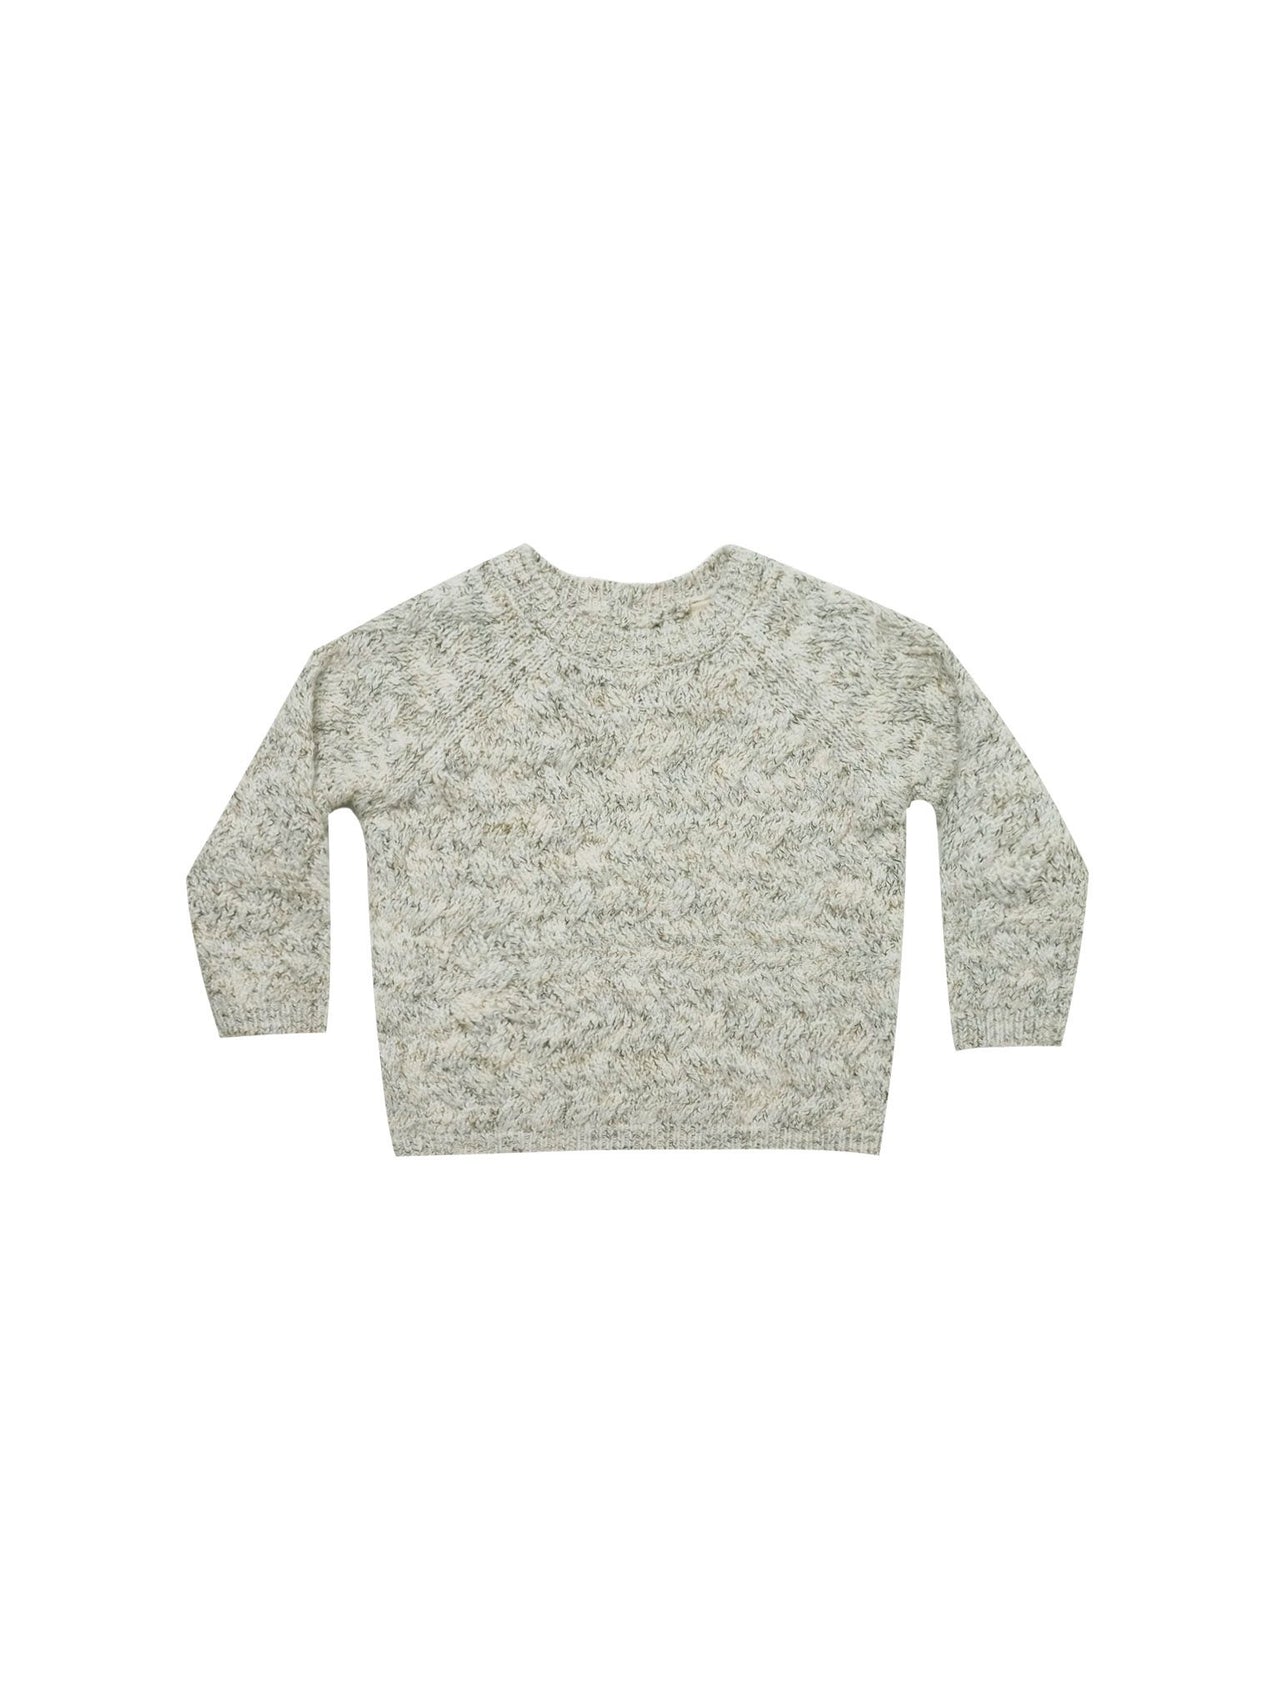 Quincy Mae Heathered Knit Sweater, Fern